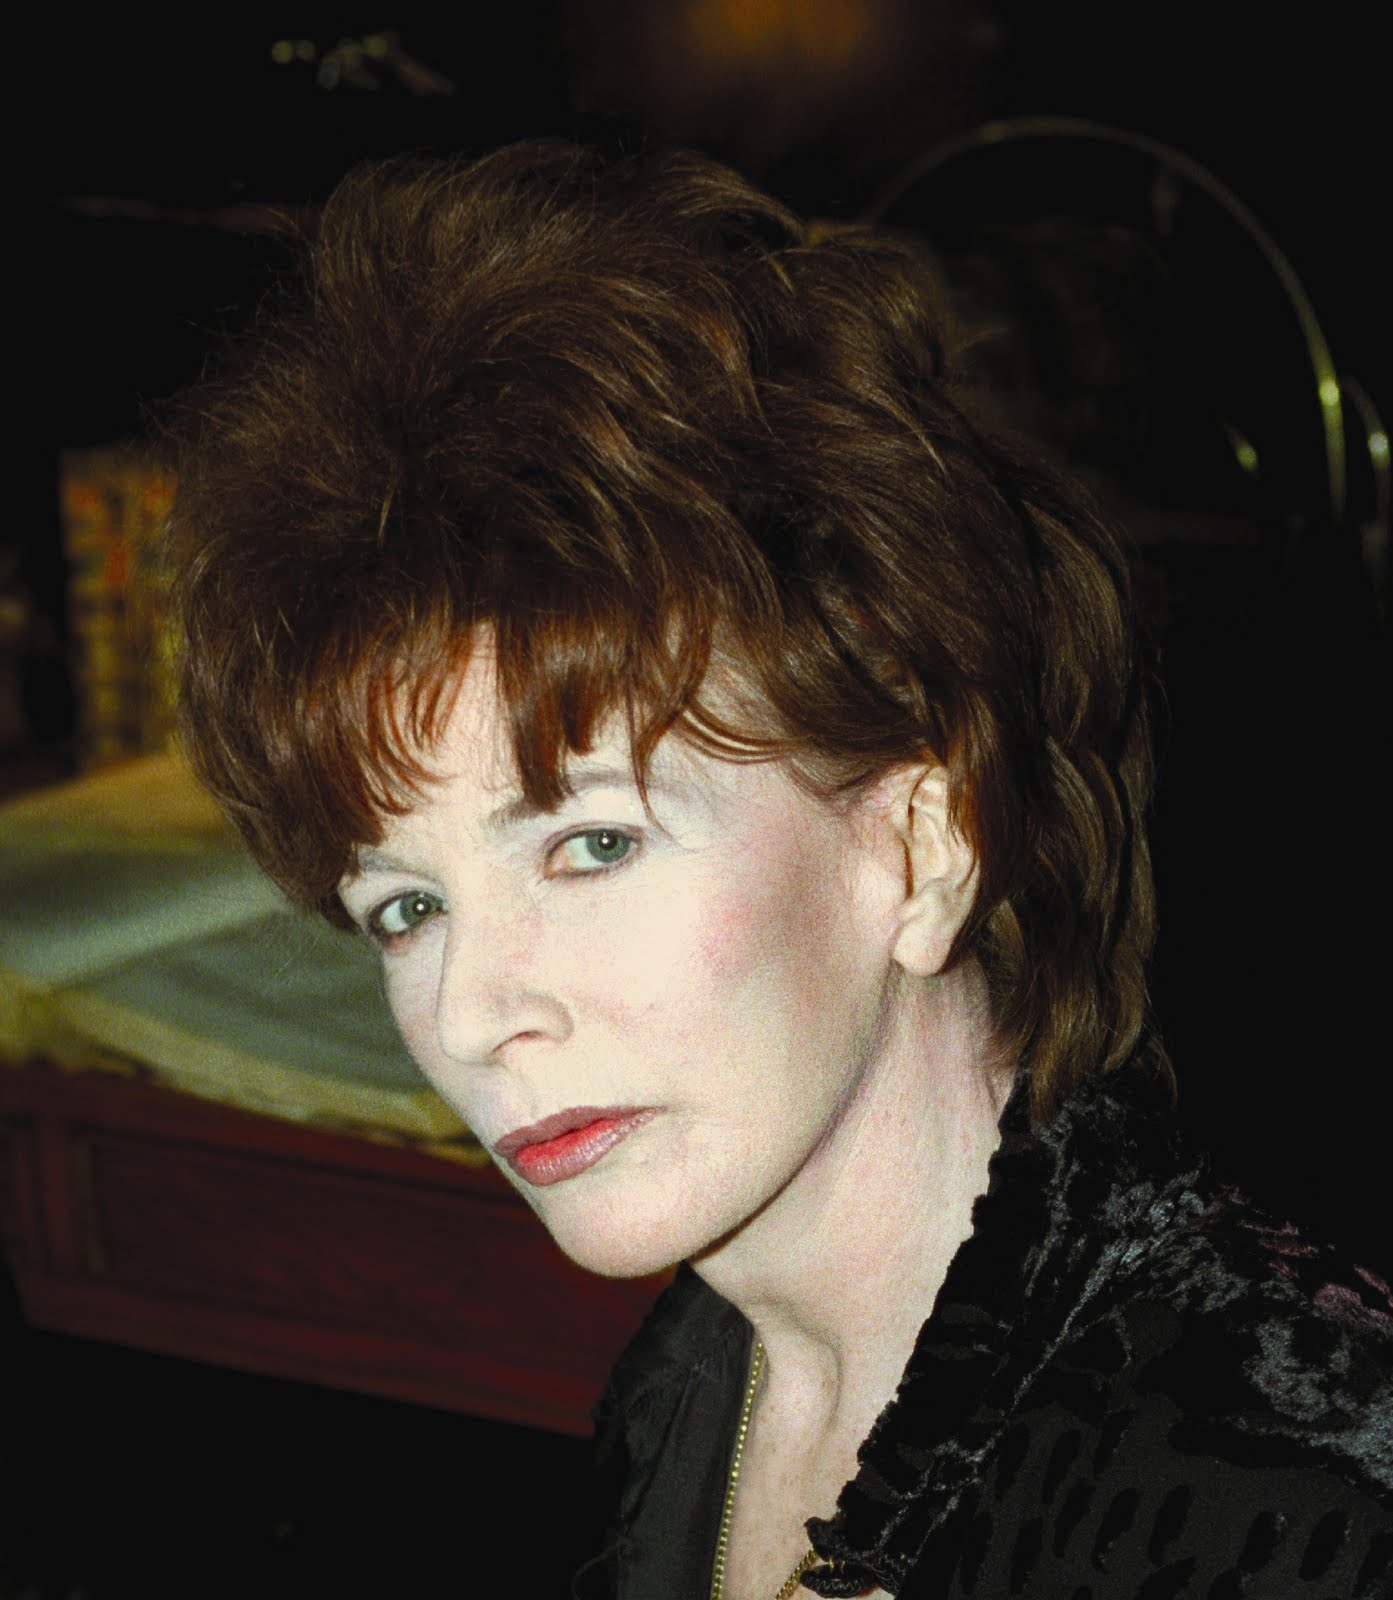 Saints and Sinners: Stories Edna O'Brien